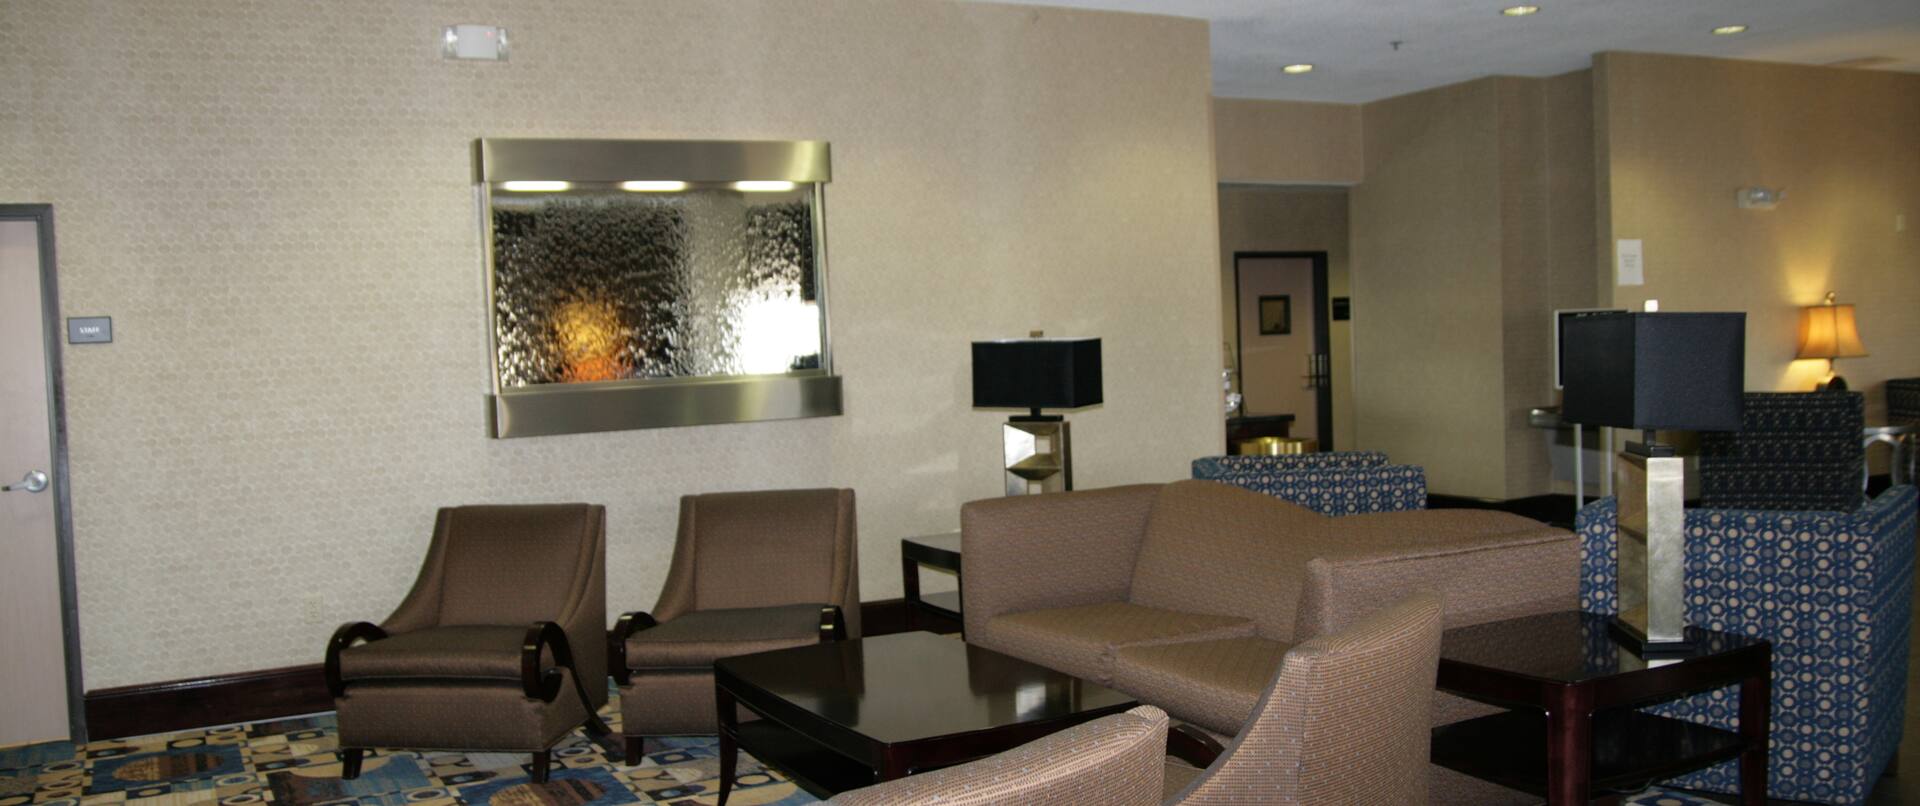 Lobby Area with Sofas and Chairs 